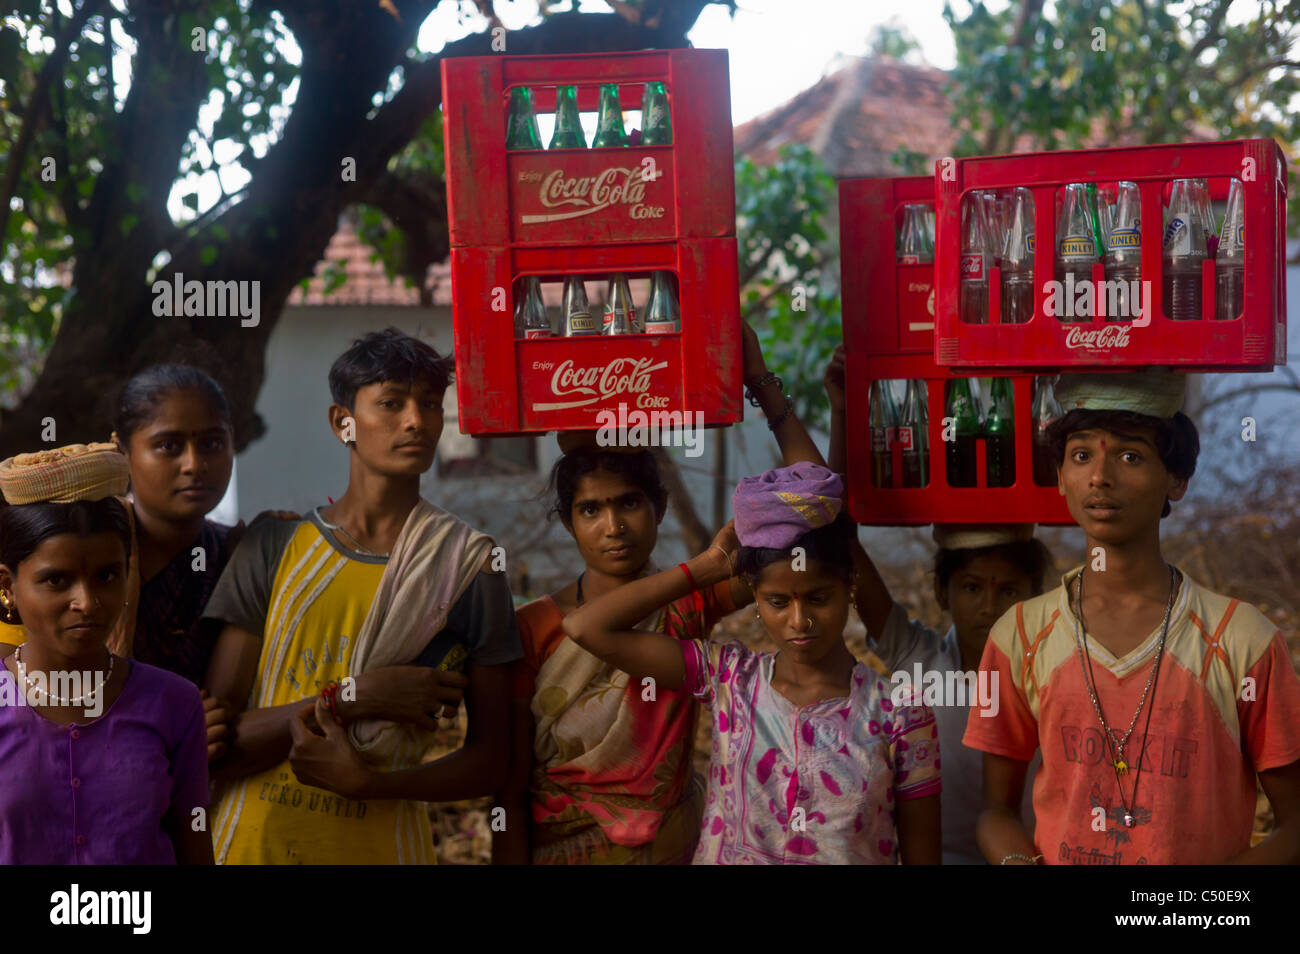 Indian youth carrying coca cola boxes on their heads, Anjuna, Goa, India Stock Photo